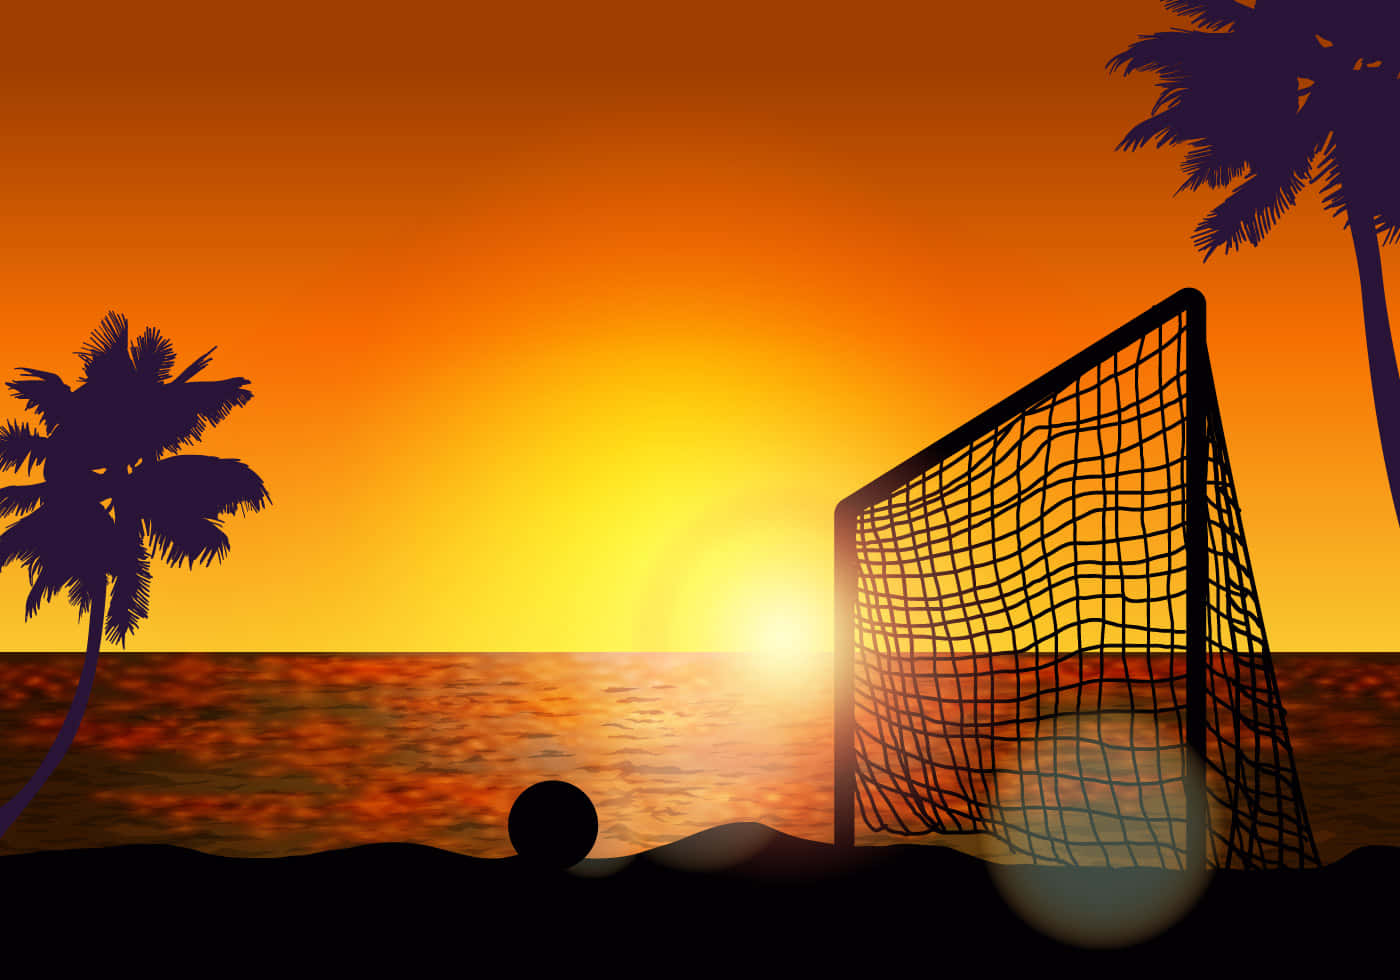 High Action At A Professional Beach Soccer Game Wallpaper